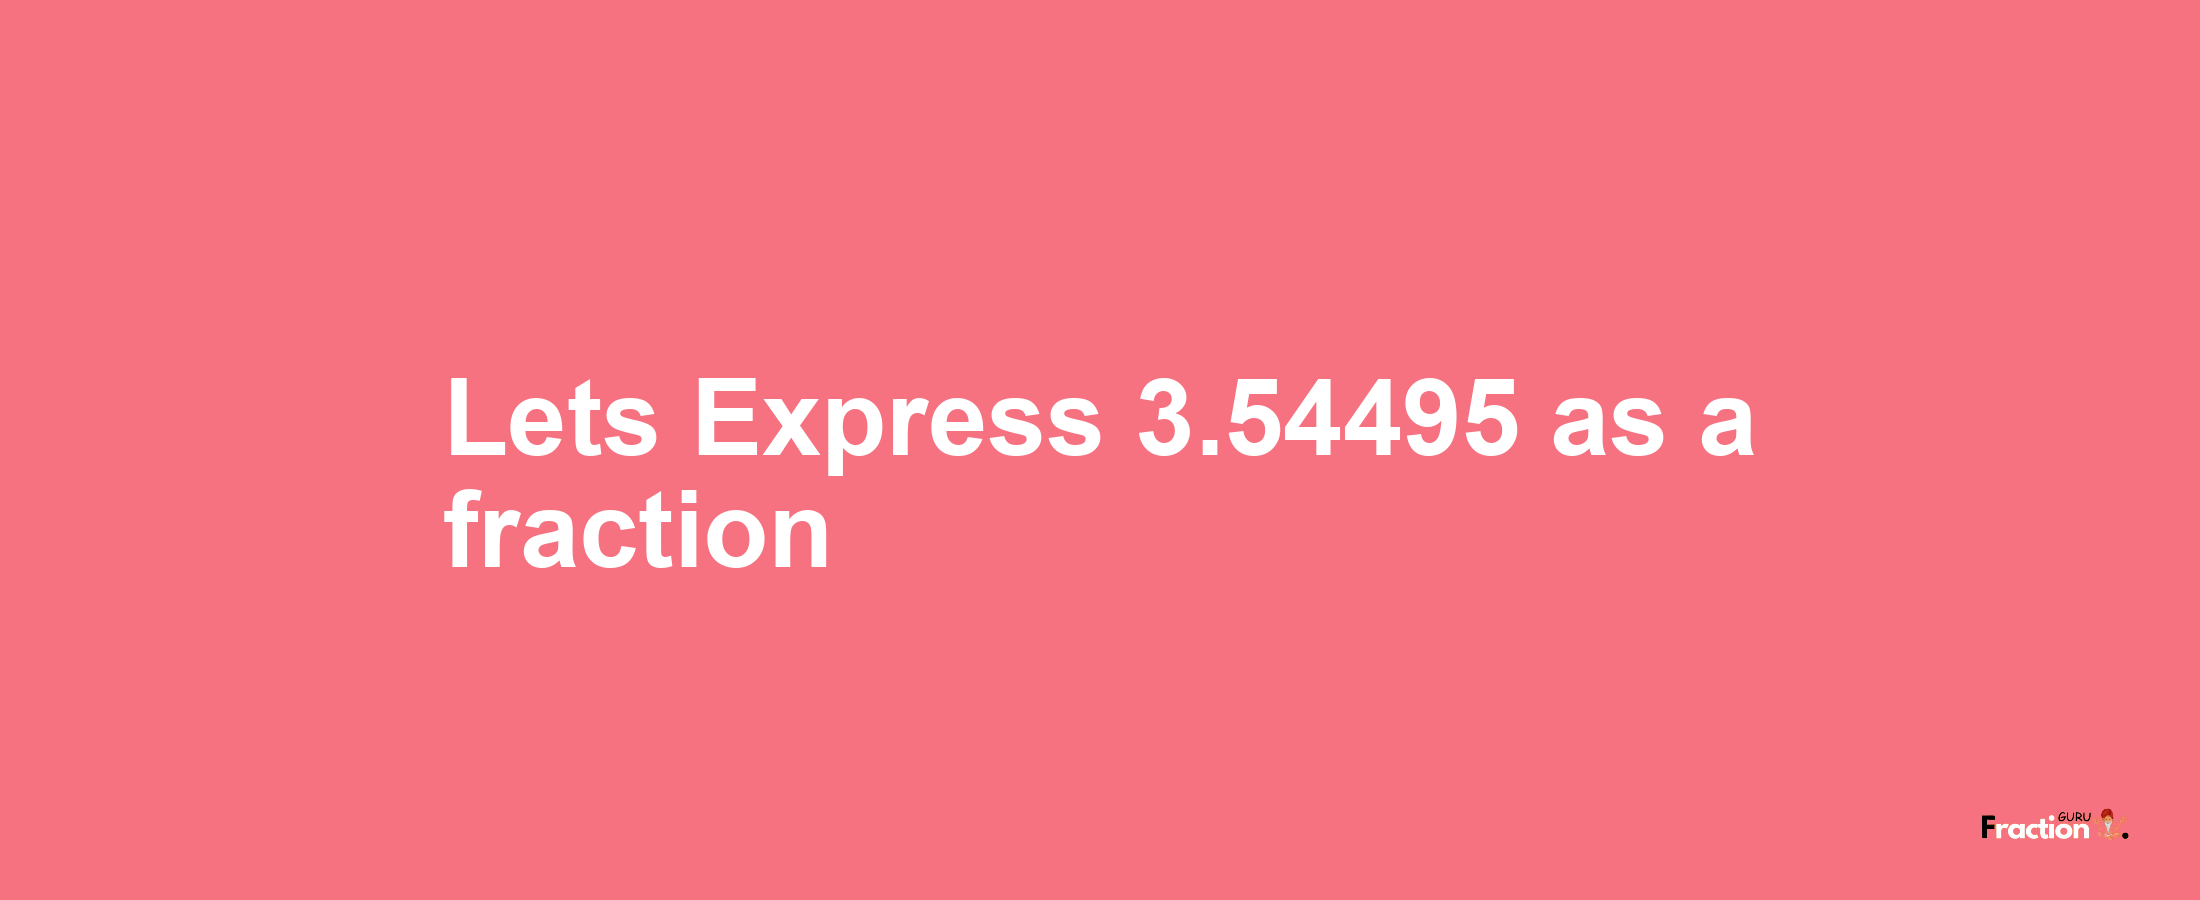 Lets Express 3.54495 as afraction